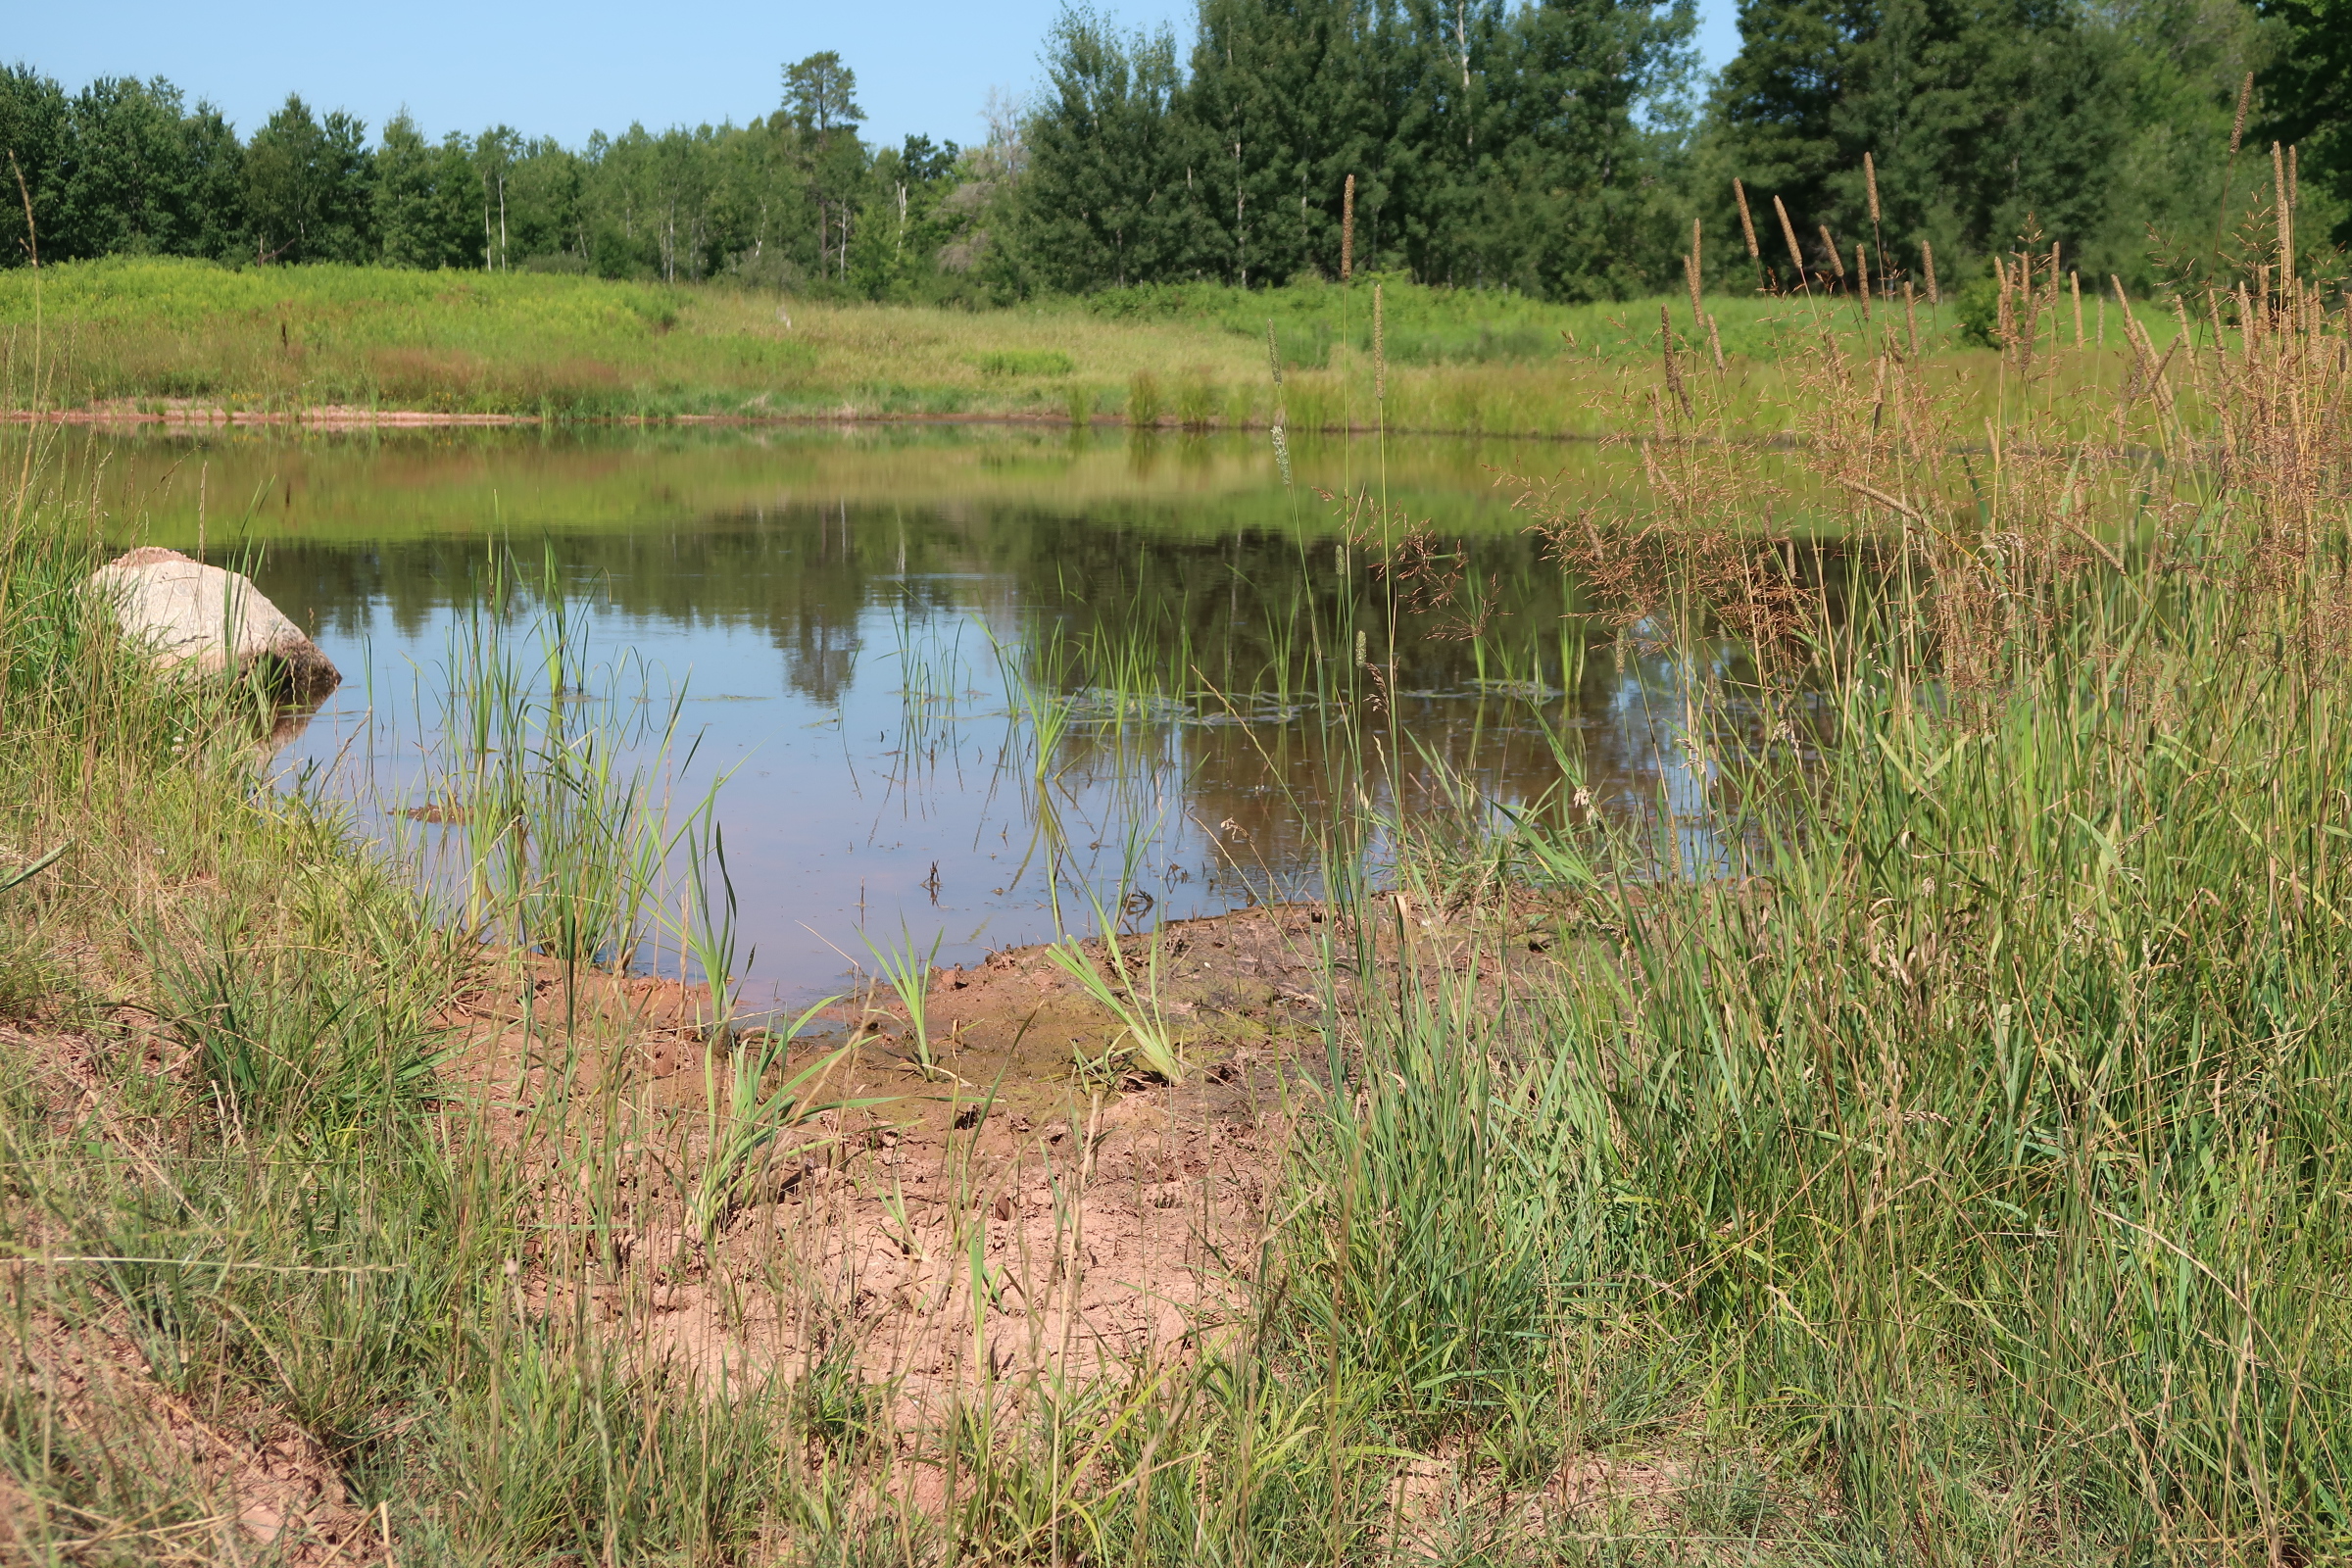 Northern Wisconsin Project Seeks To ‘Slow The Flow’ Of Stormwater